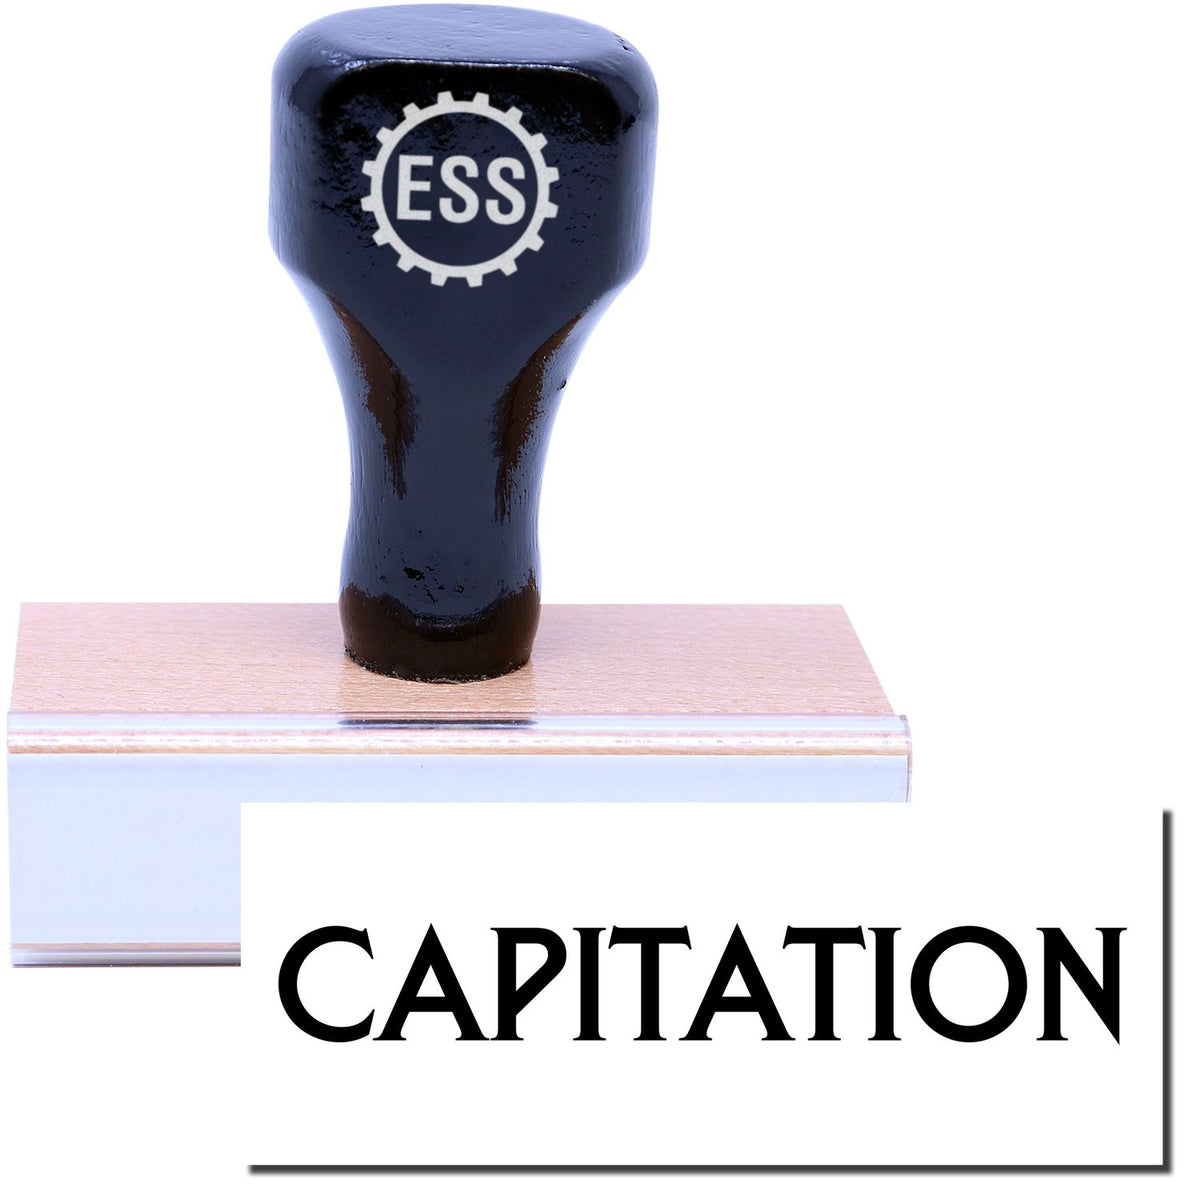 A stock office medical rubber stamp with a stamped image showing how the text &quot;CAPITATION&quot; is displayed after stamping.